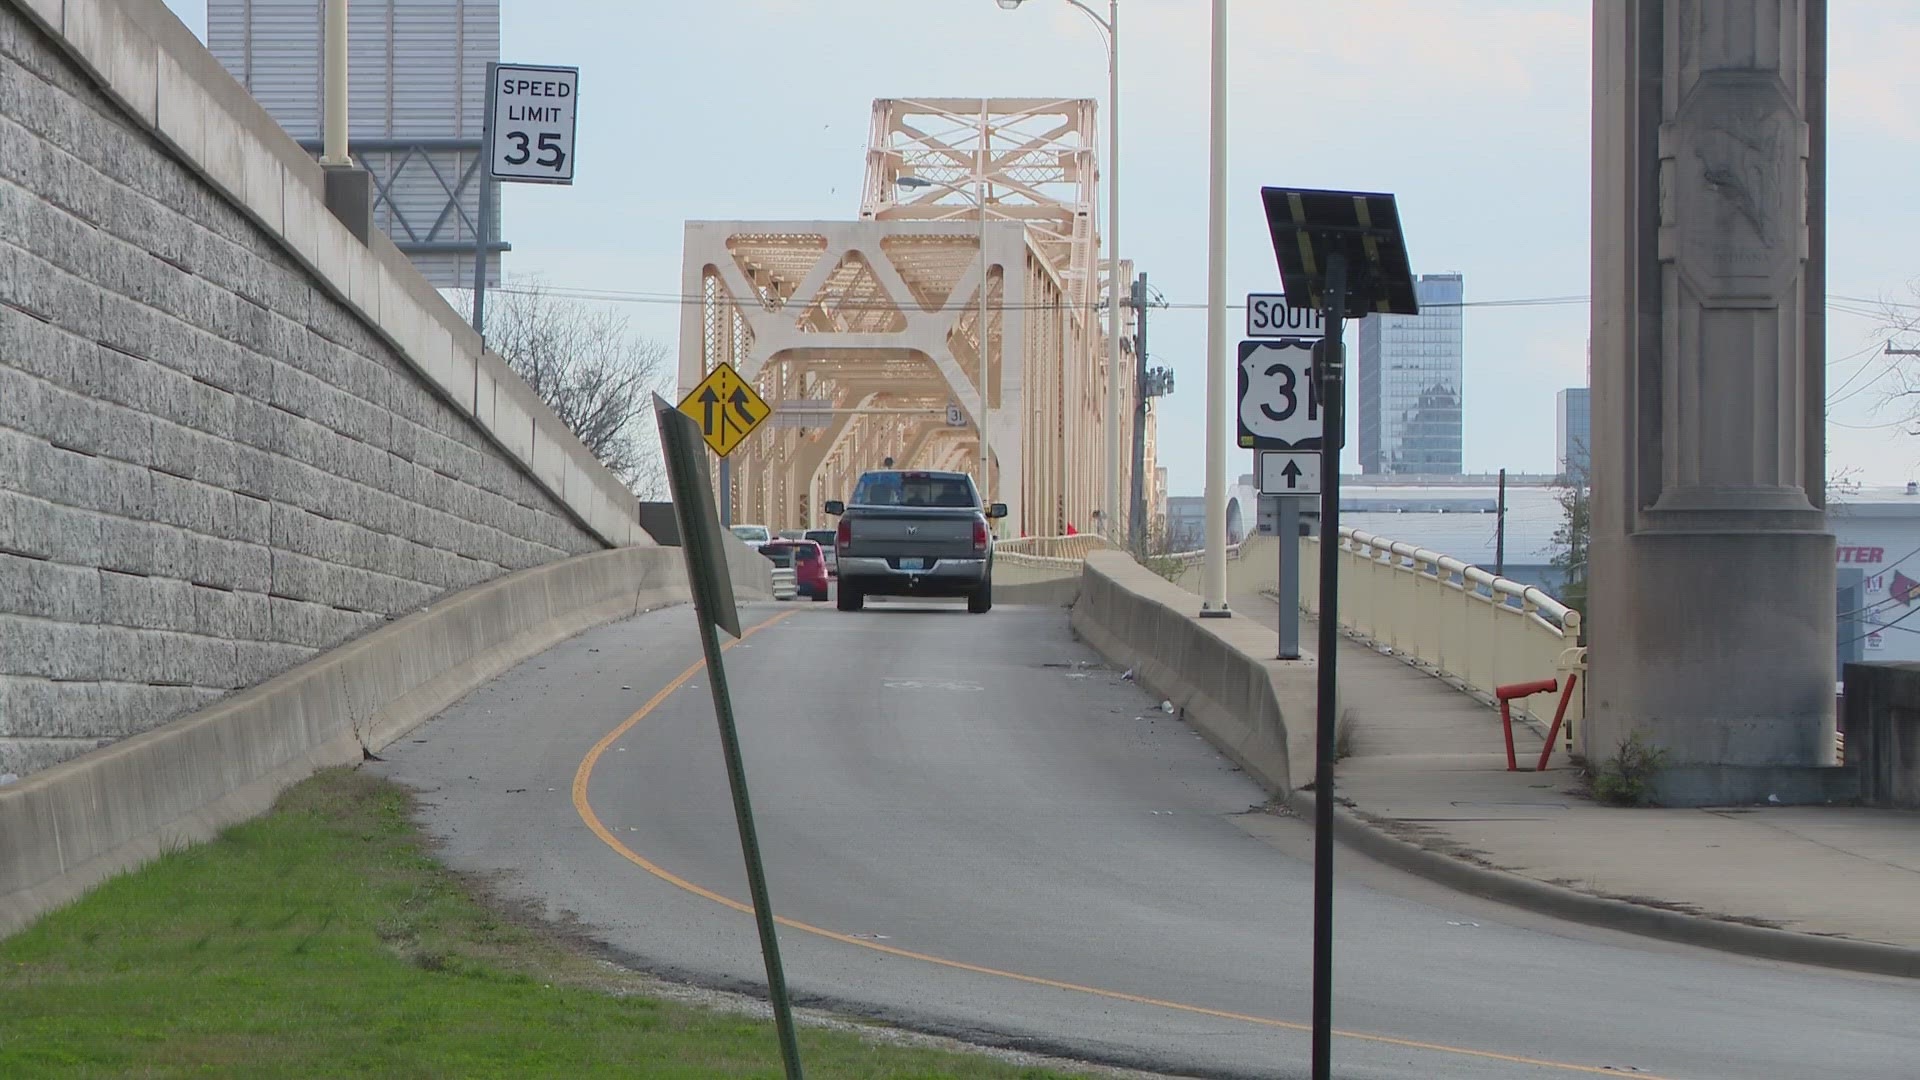 The 95-year-old bridge will be restricted to one lane traffic starting March 20 for emergency repairs.